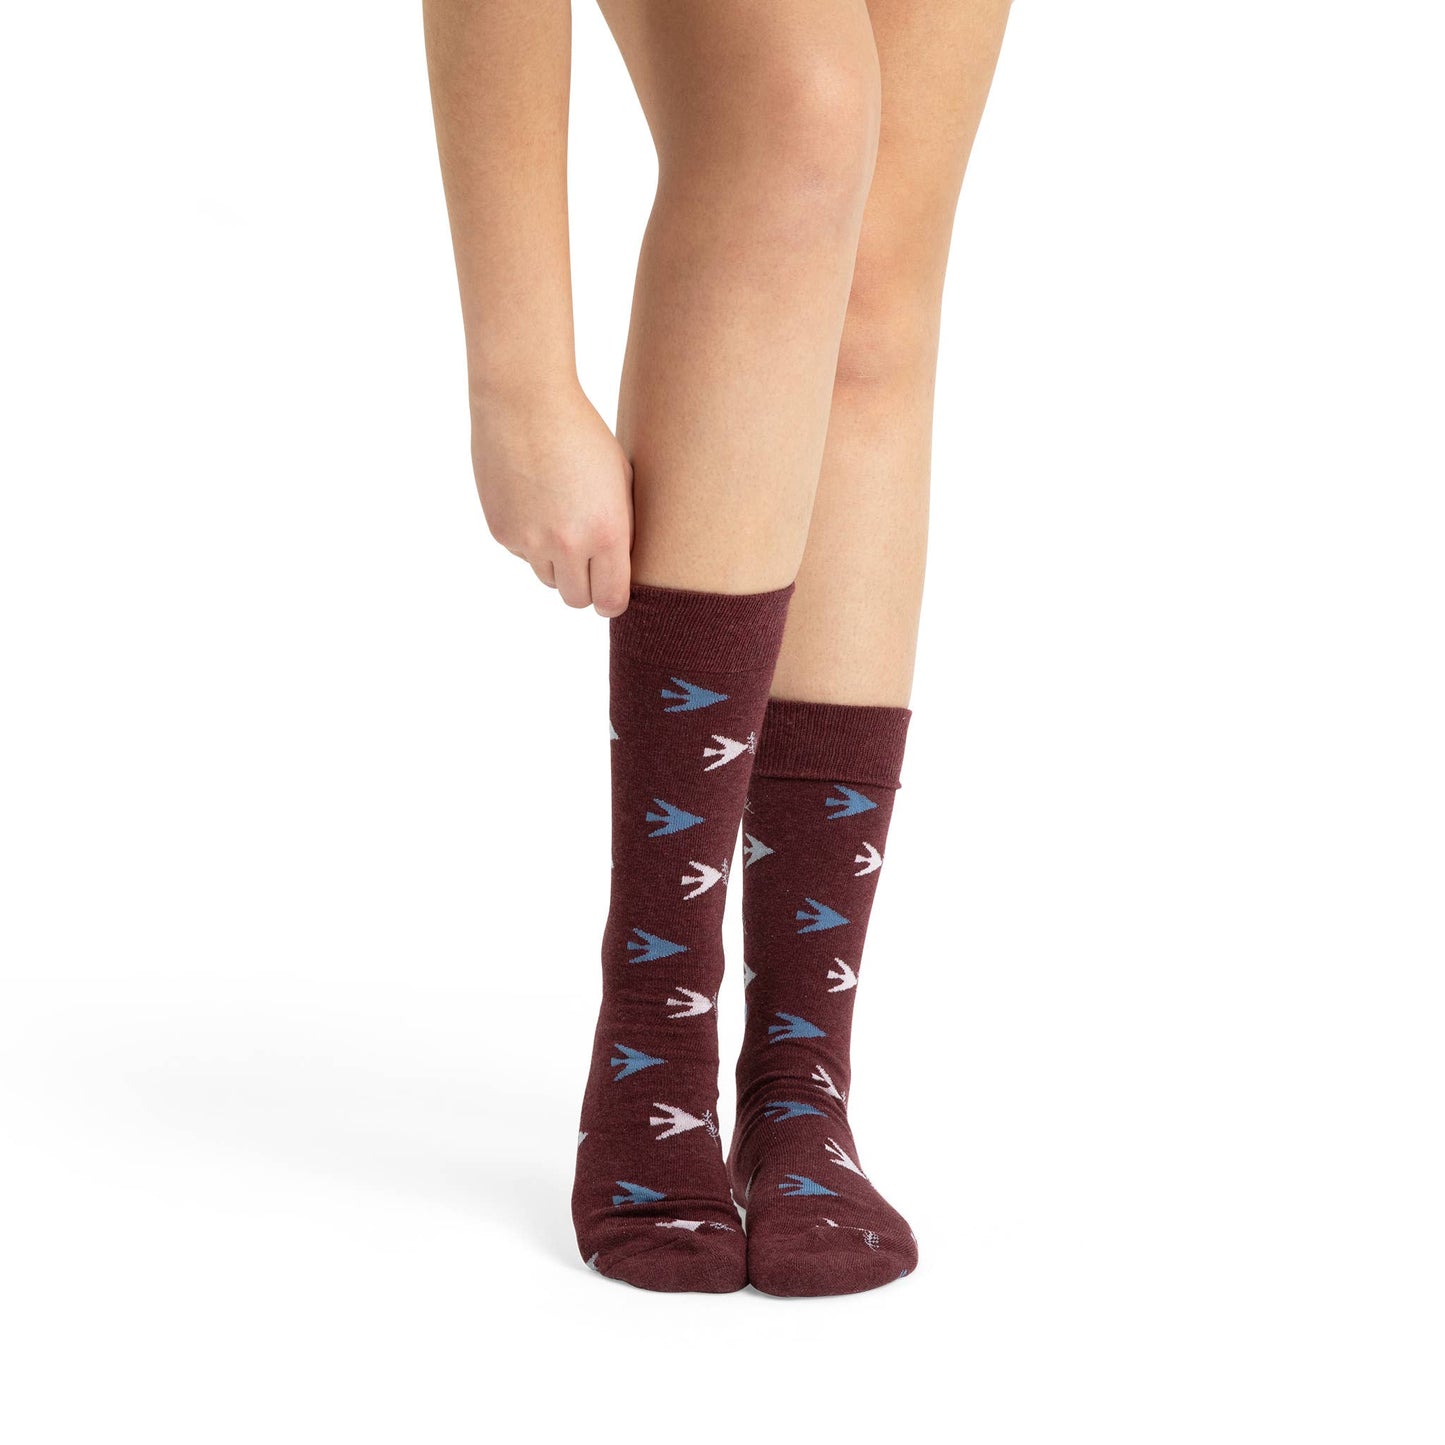 Socks that Fight for Equality (Maroon Doves): Medium